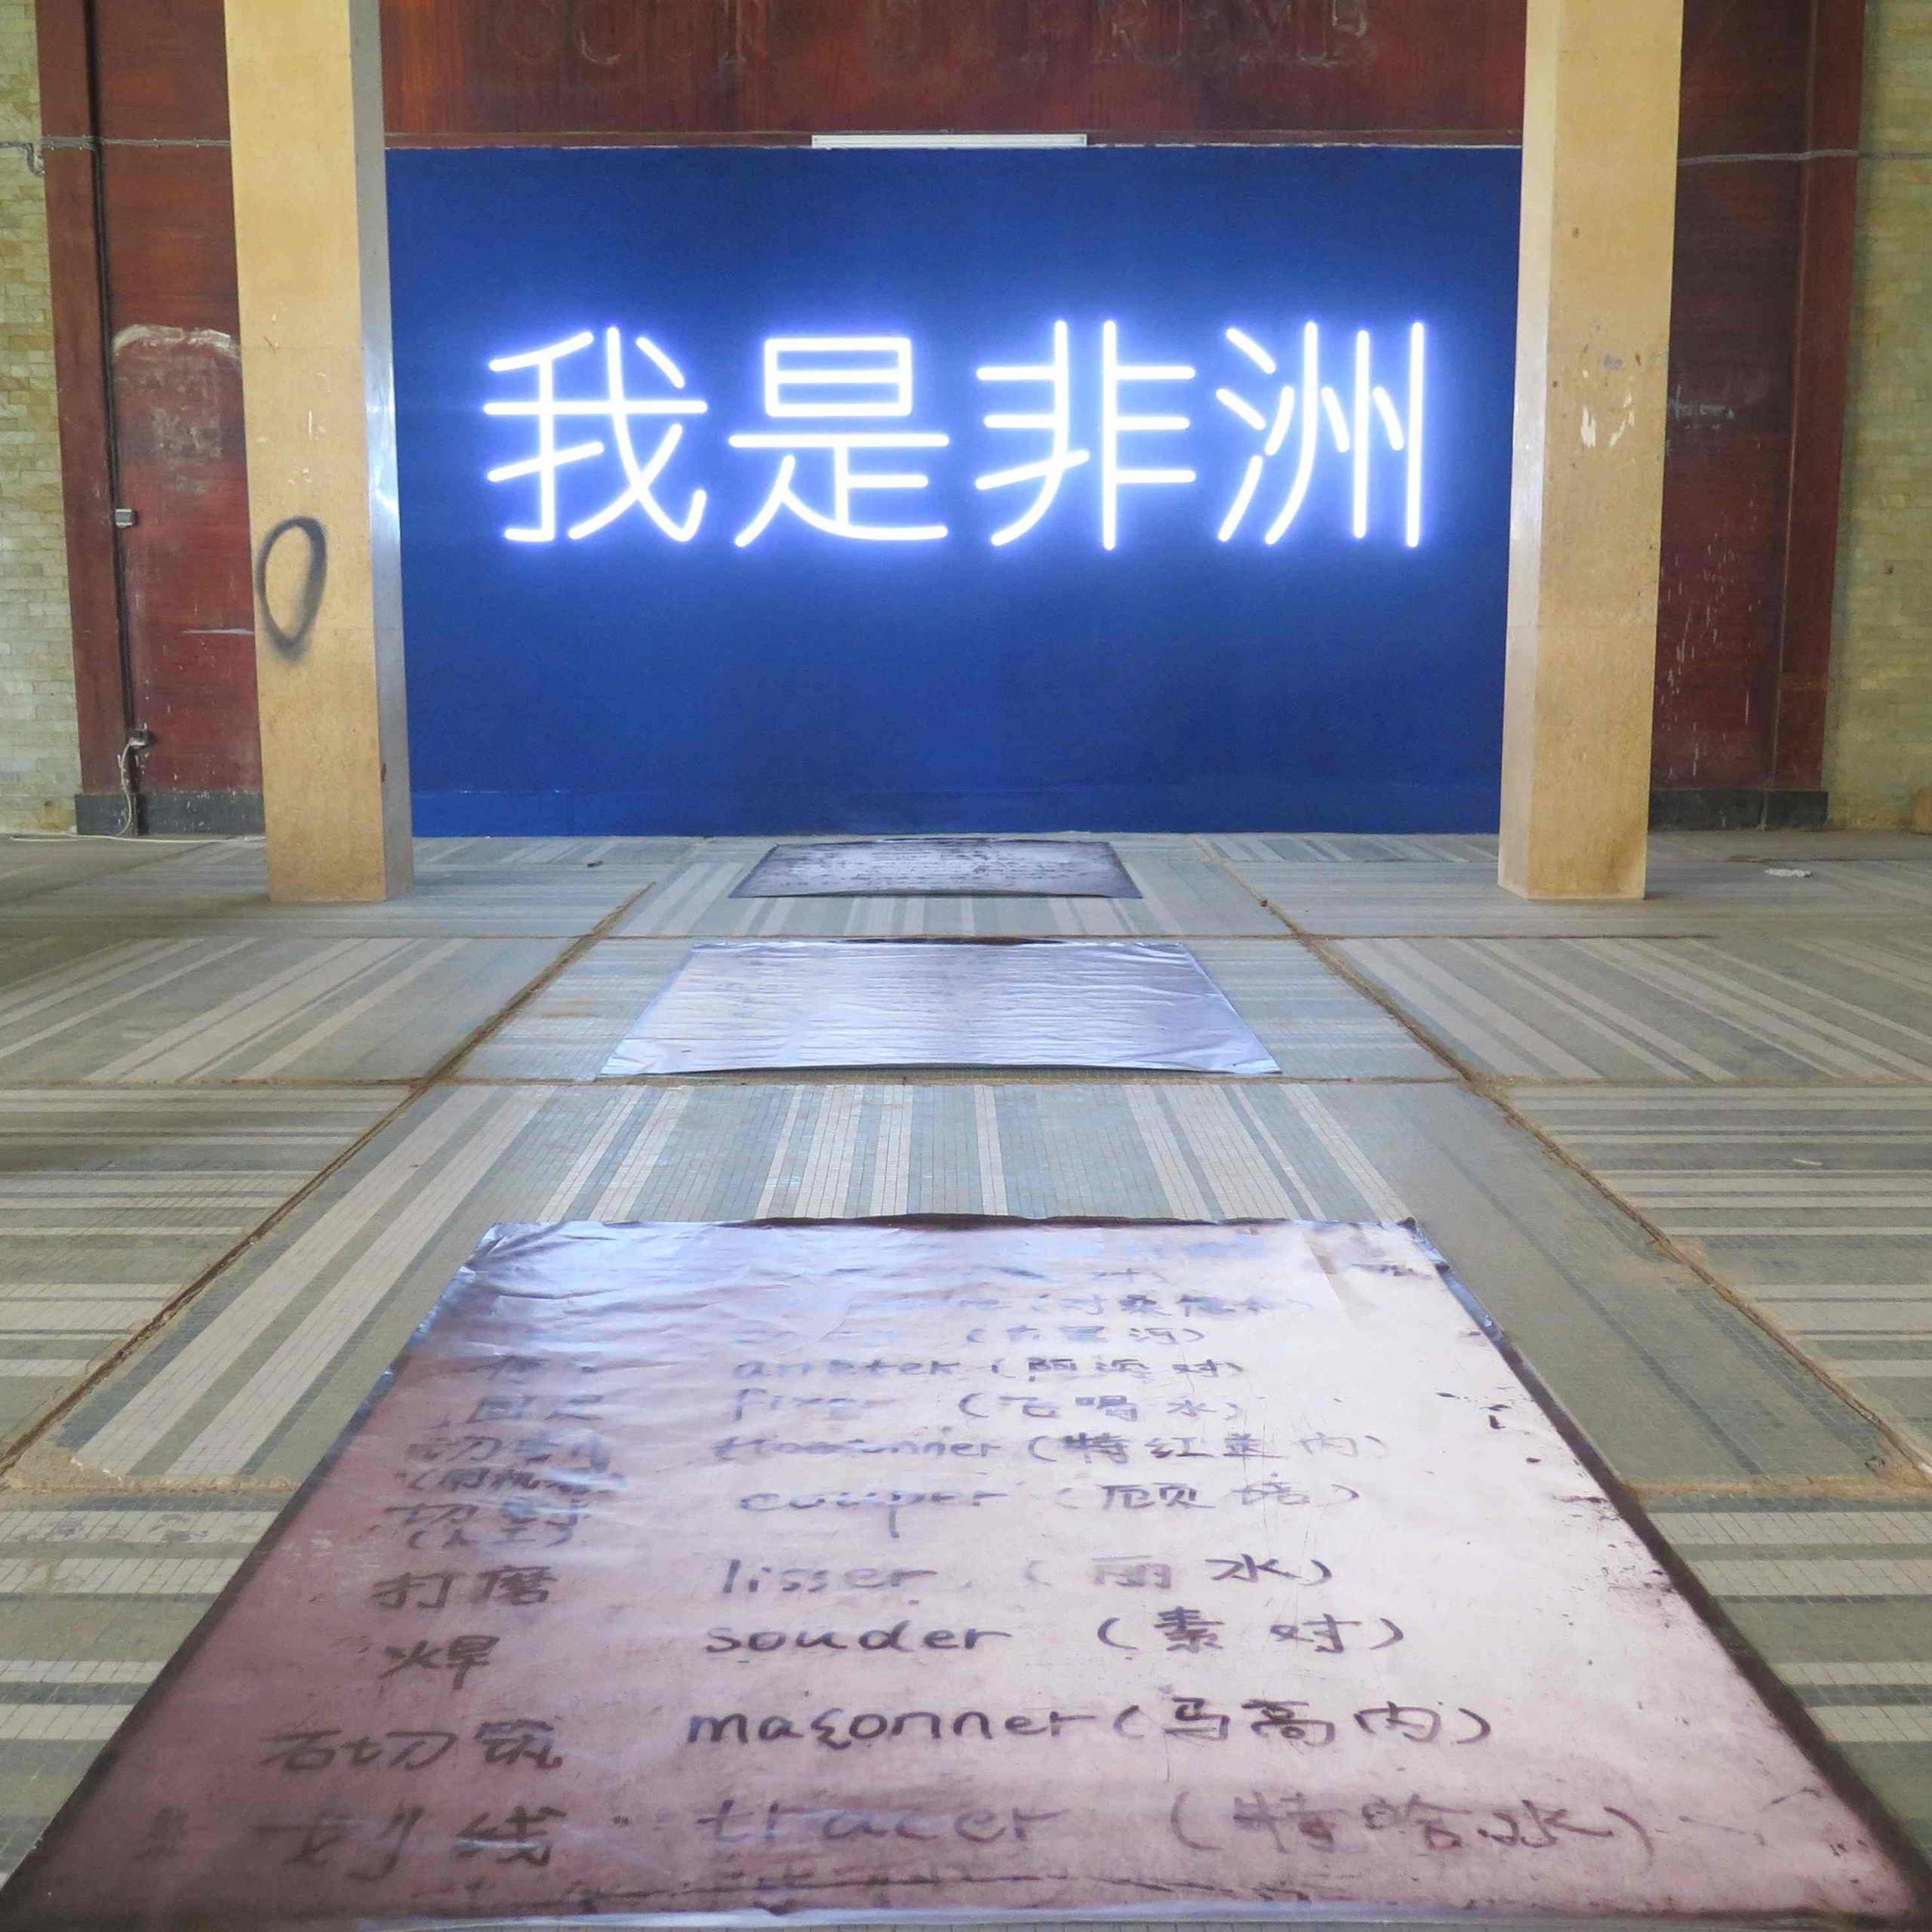 François-Xavier Gbré, ‘Wo shi feizhou’, exhibited at the 12th edition of La Biennale de Dakar, May 2016. Image courtesy of Galerie Cécile Fakhoury.